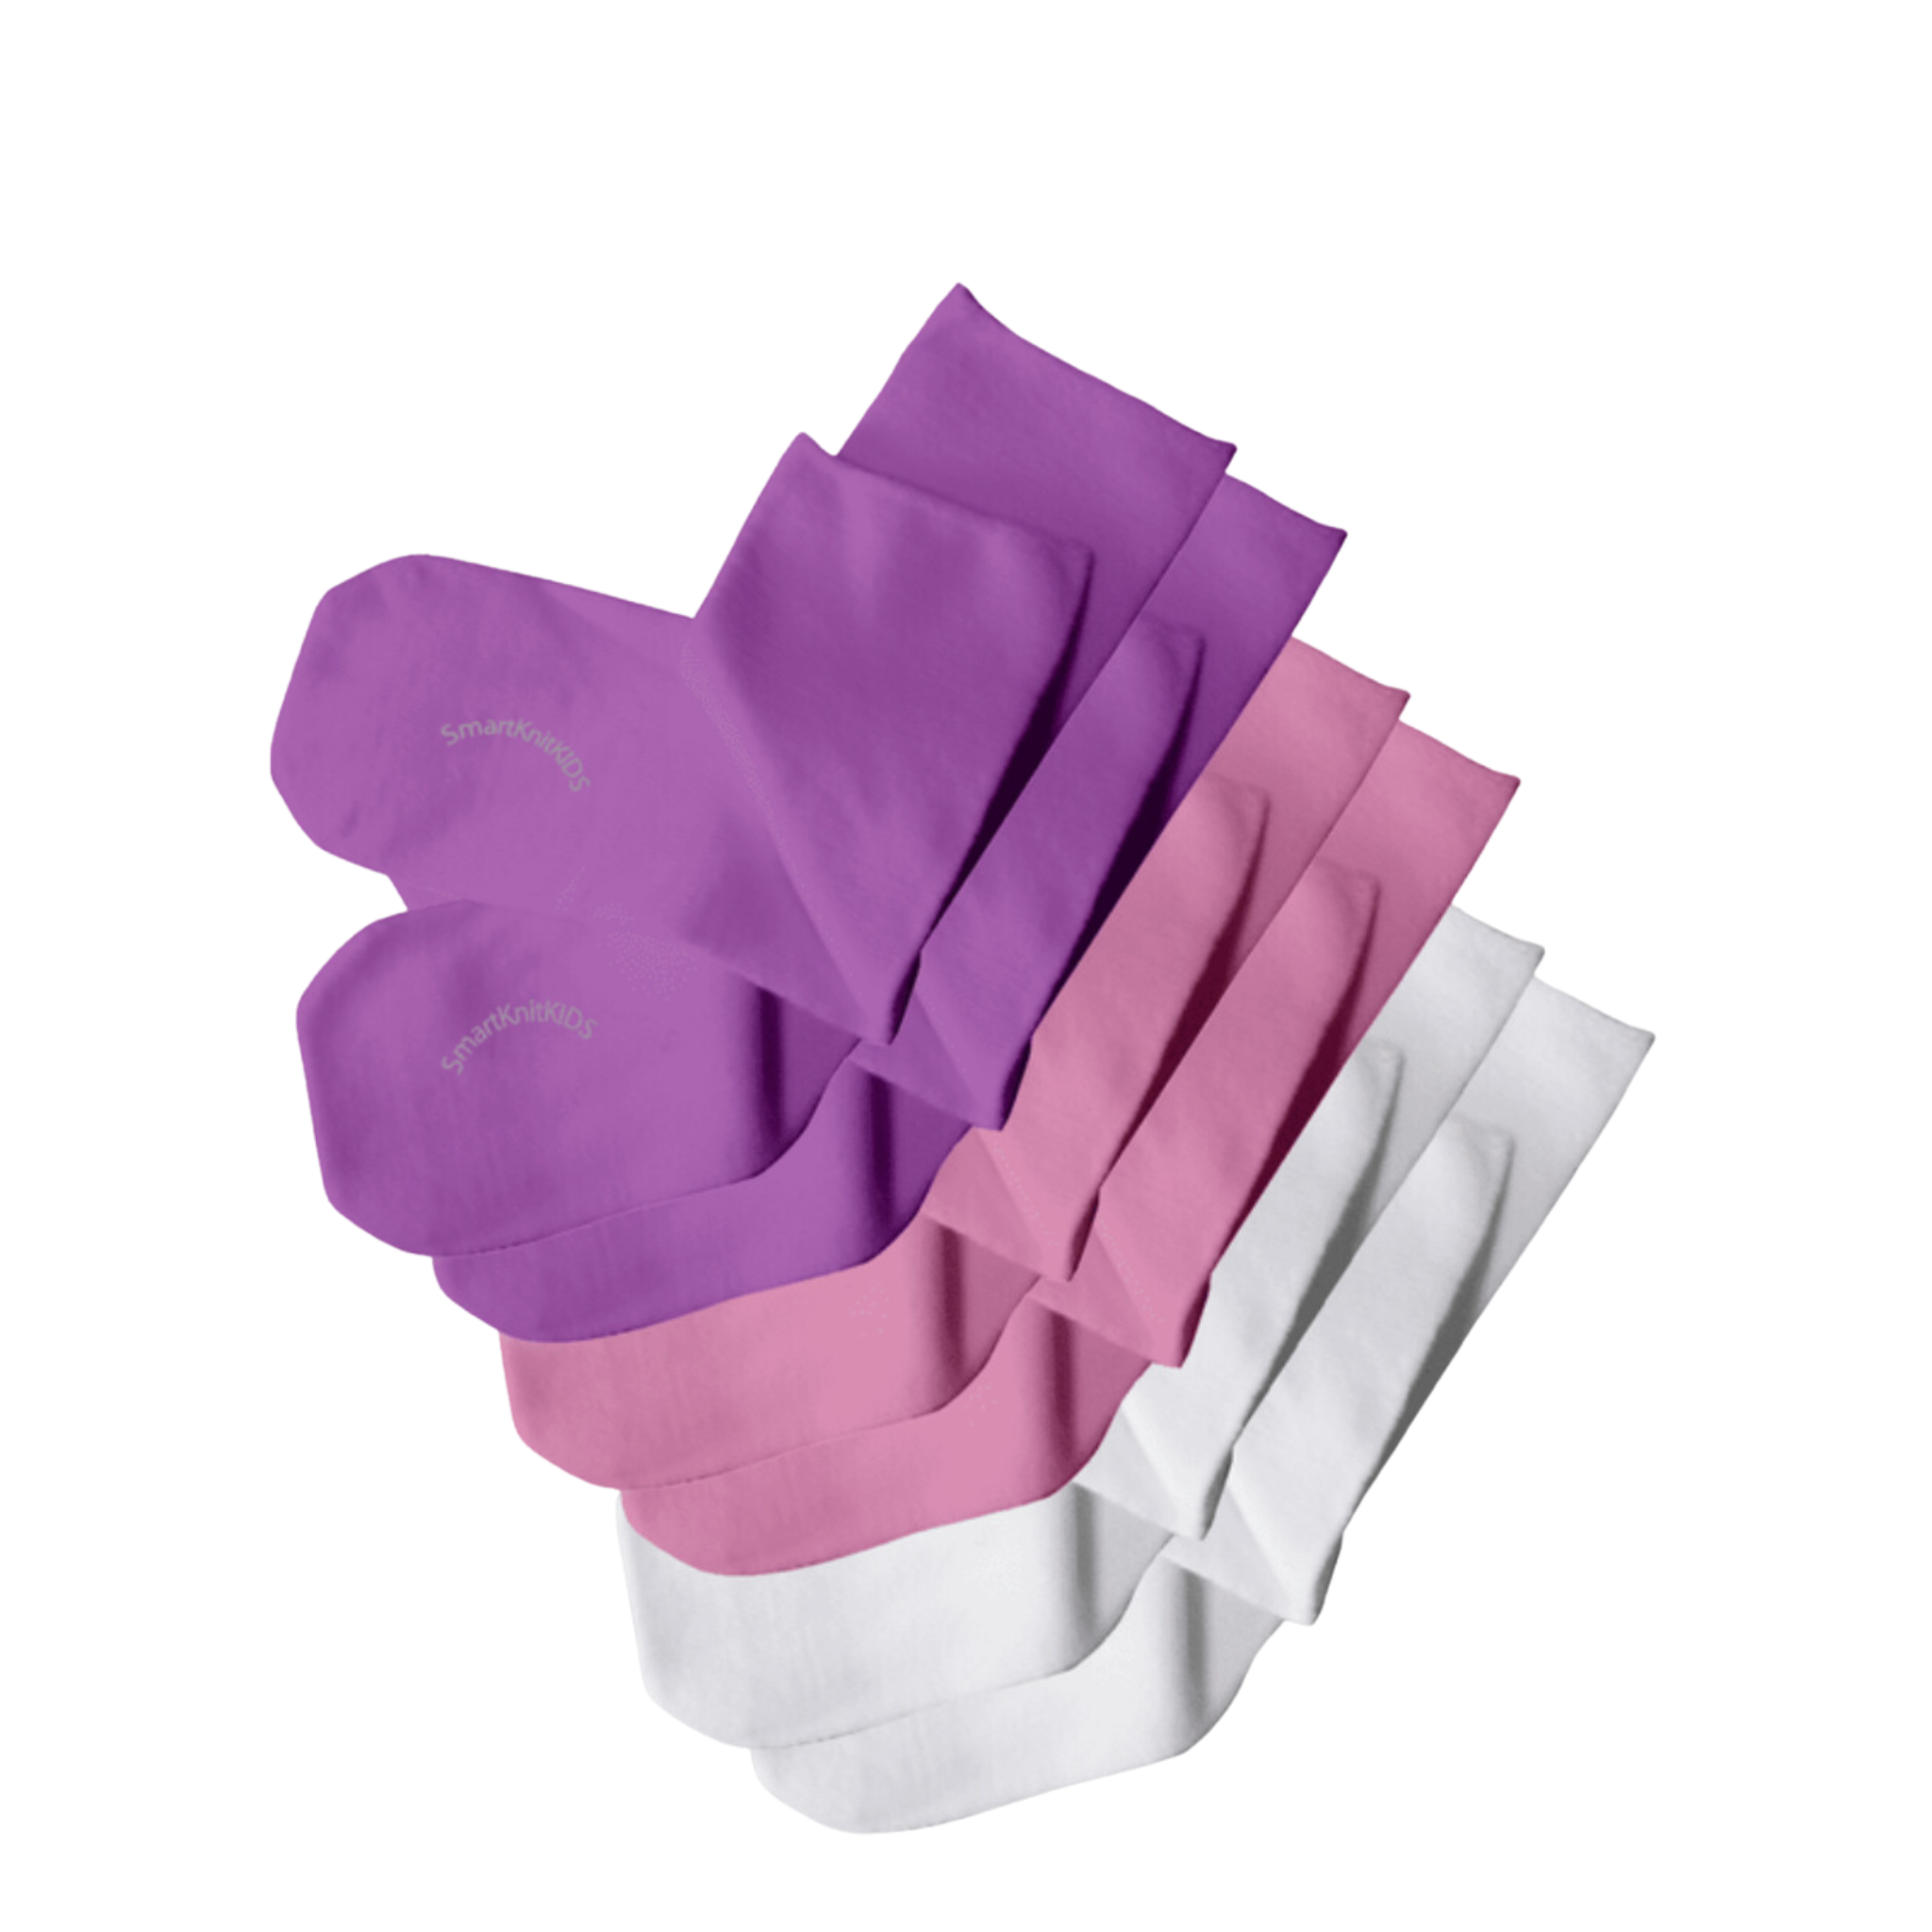 SmartKnitKIDS - Absolutely Seamless Socks - Ultimate comfort sock - Pink/Purple/White - Value Pack